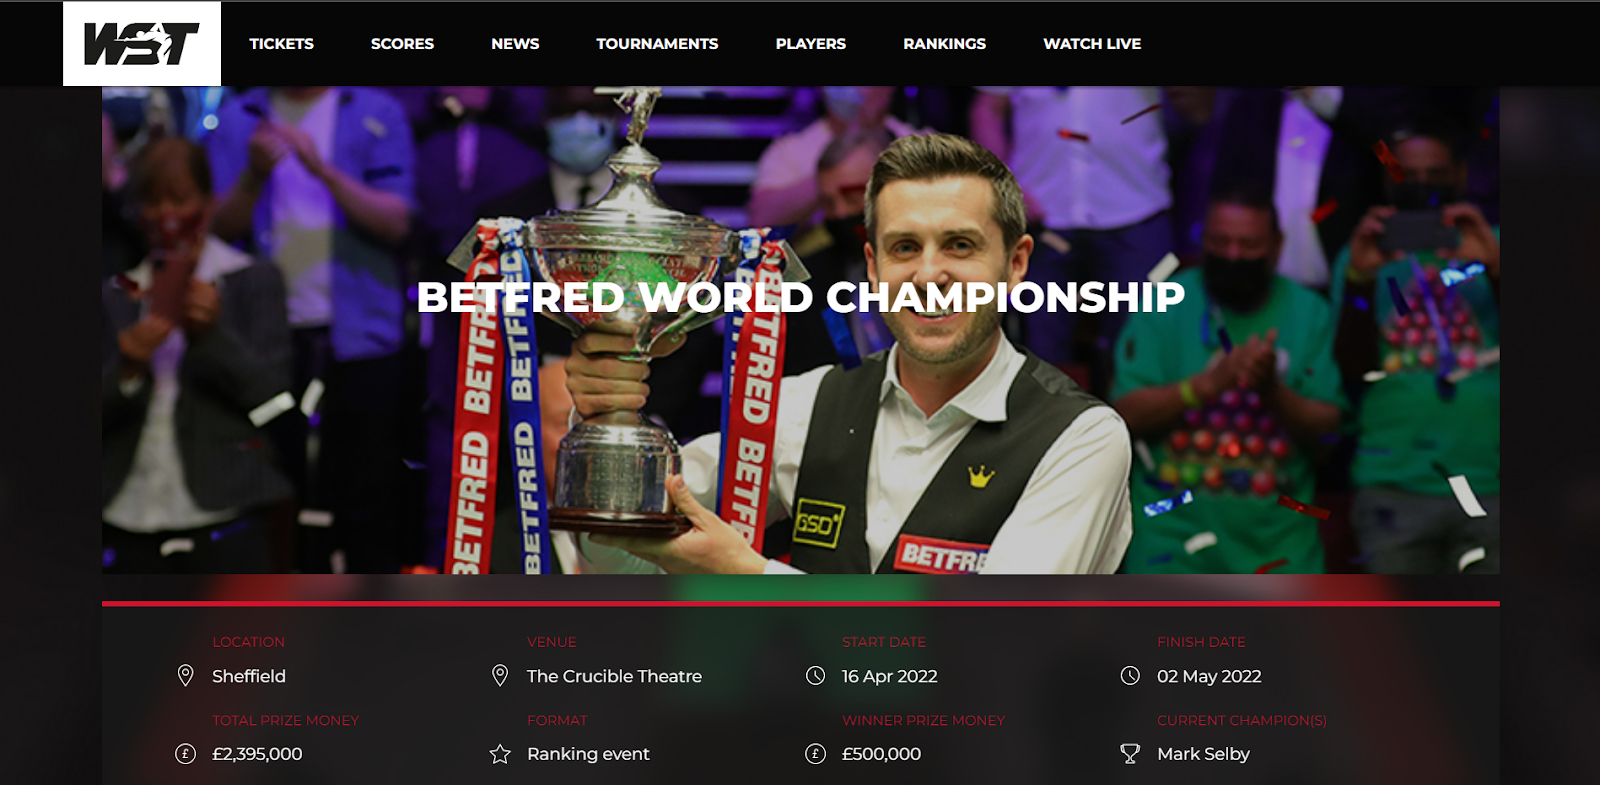 Information about the snooker championship qualifiers, previous champions and the like